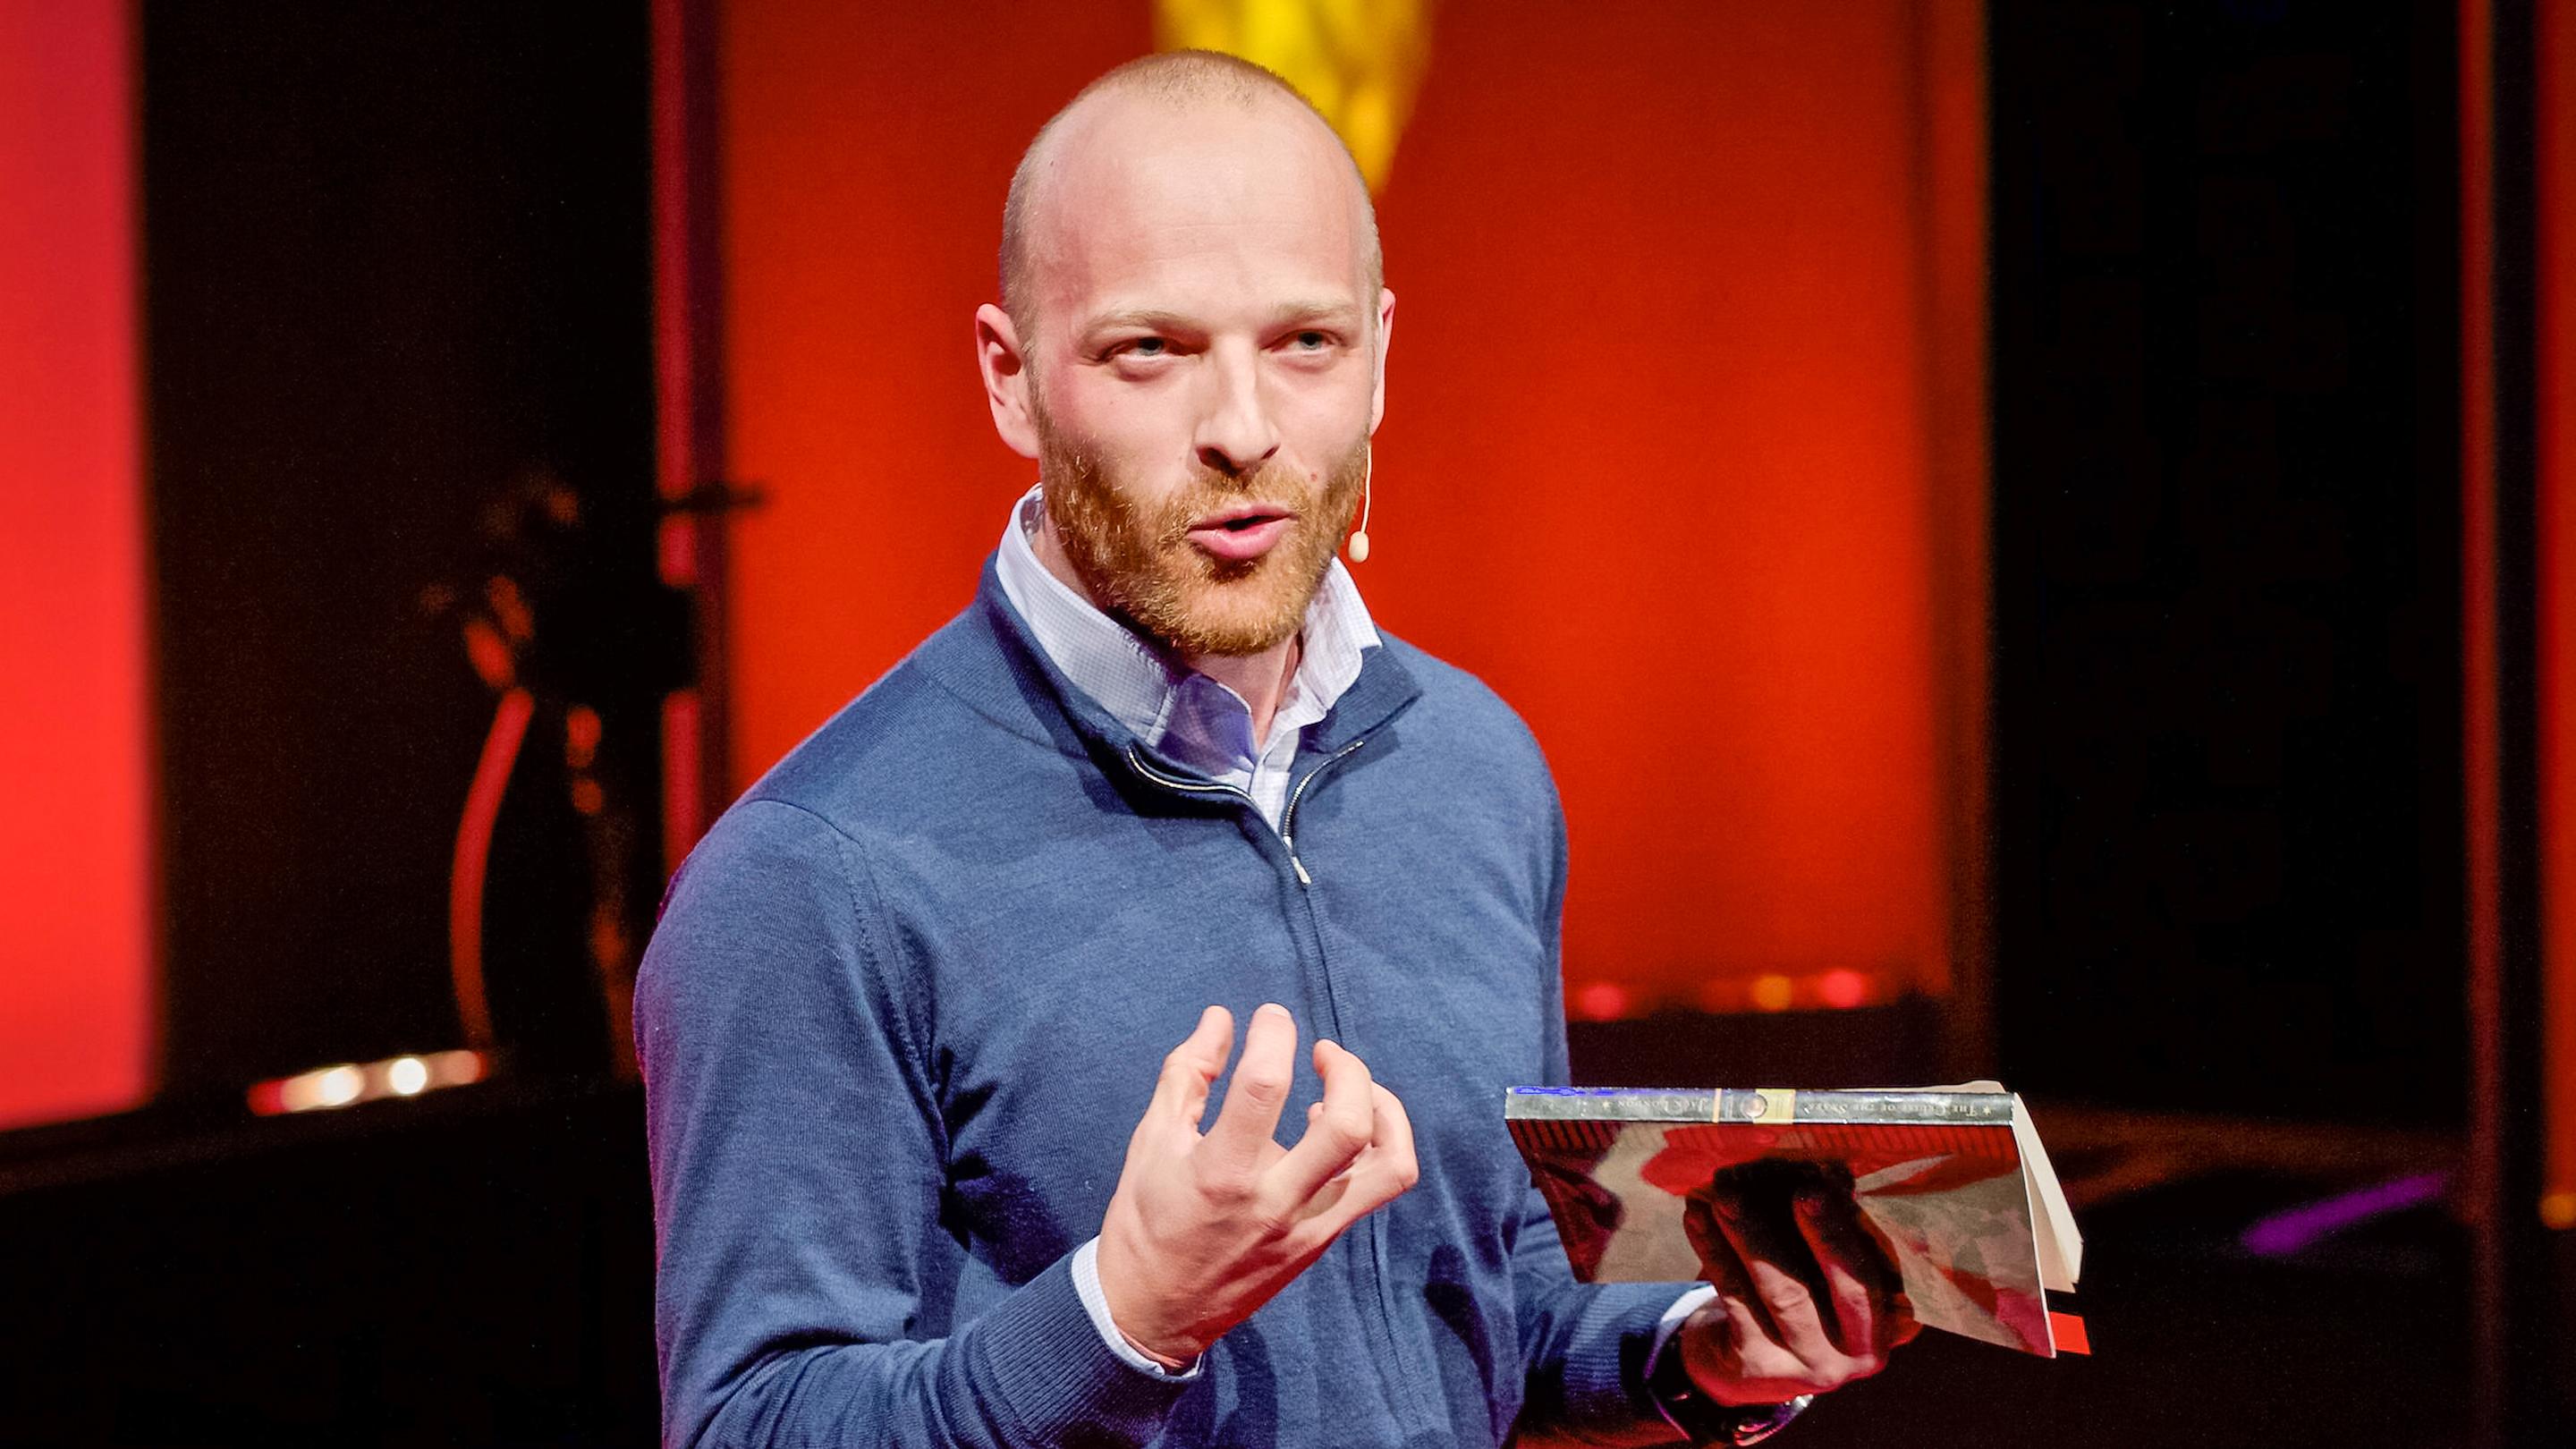 Ben Saunders: Why bother leaving the house? | TED Talk